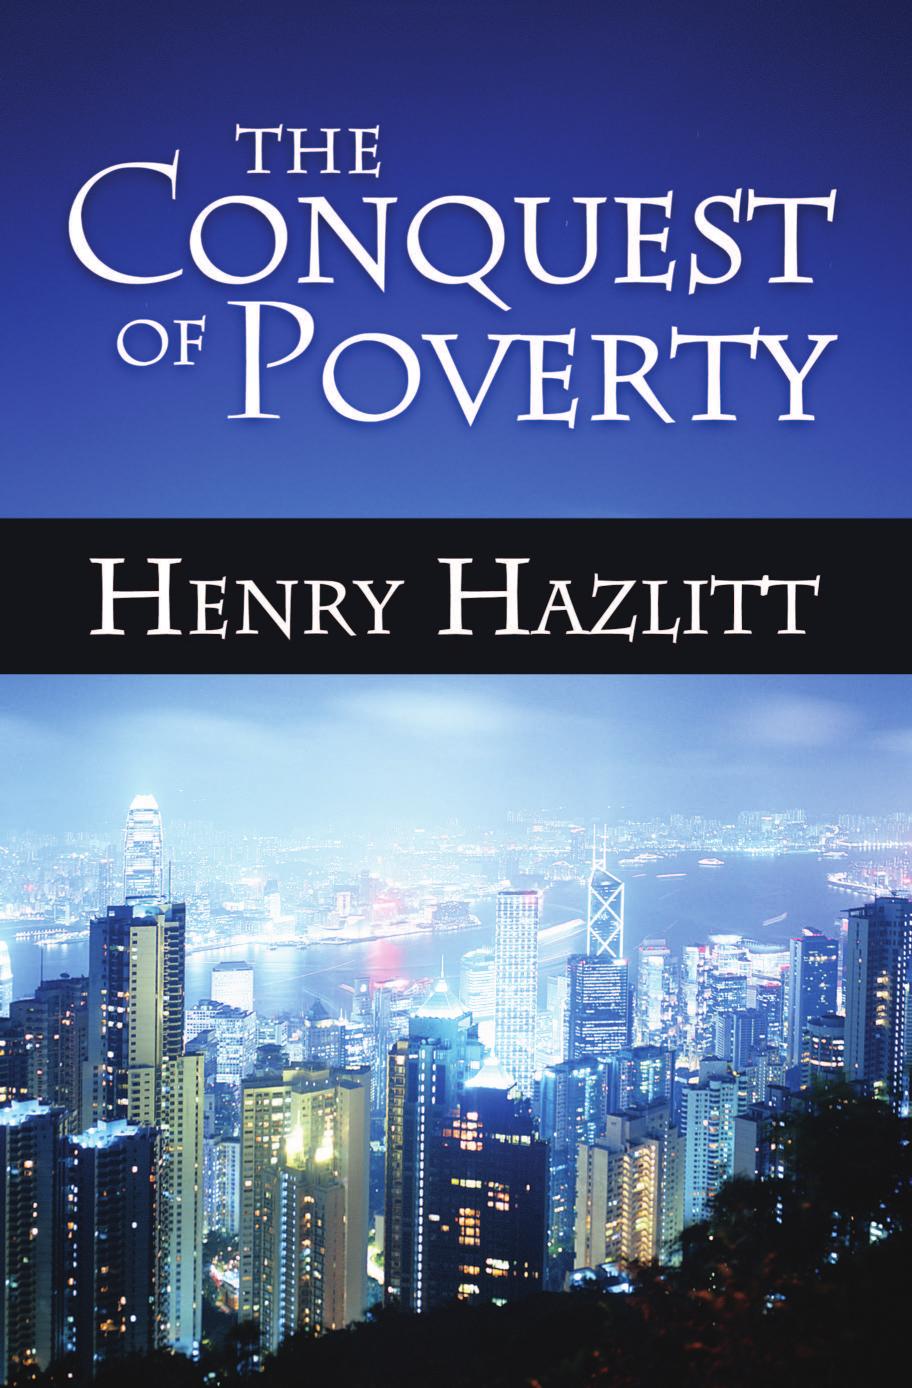 The Conquest of Poverty by Henry Hazlitt